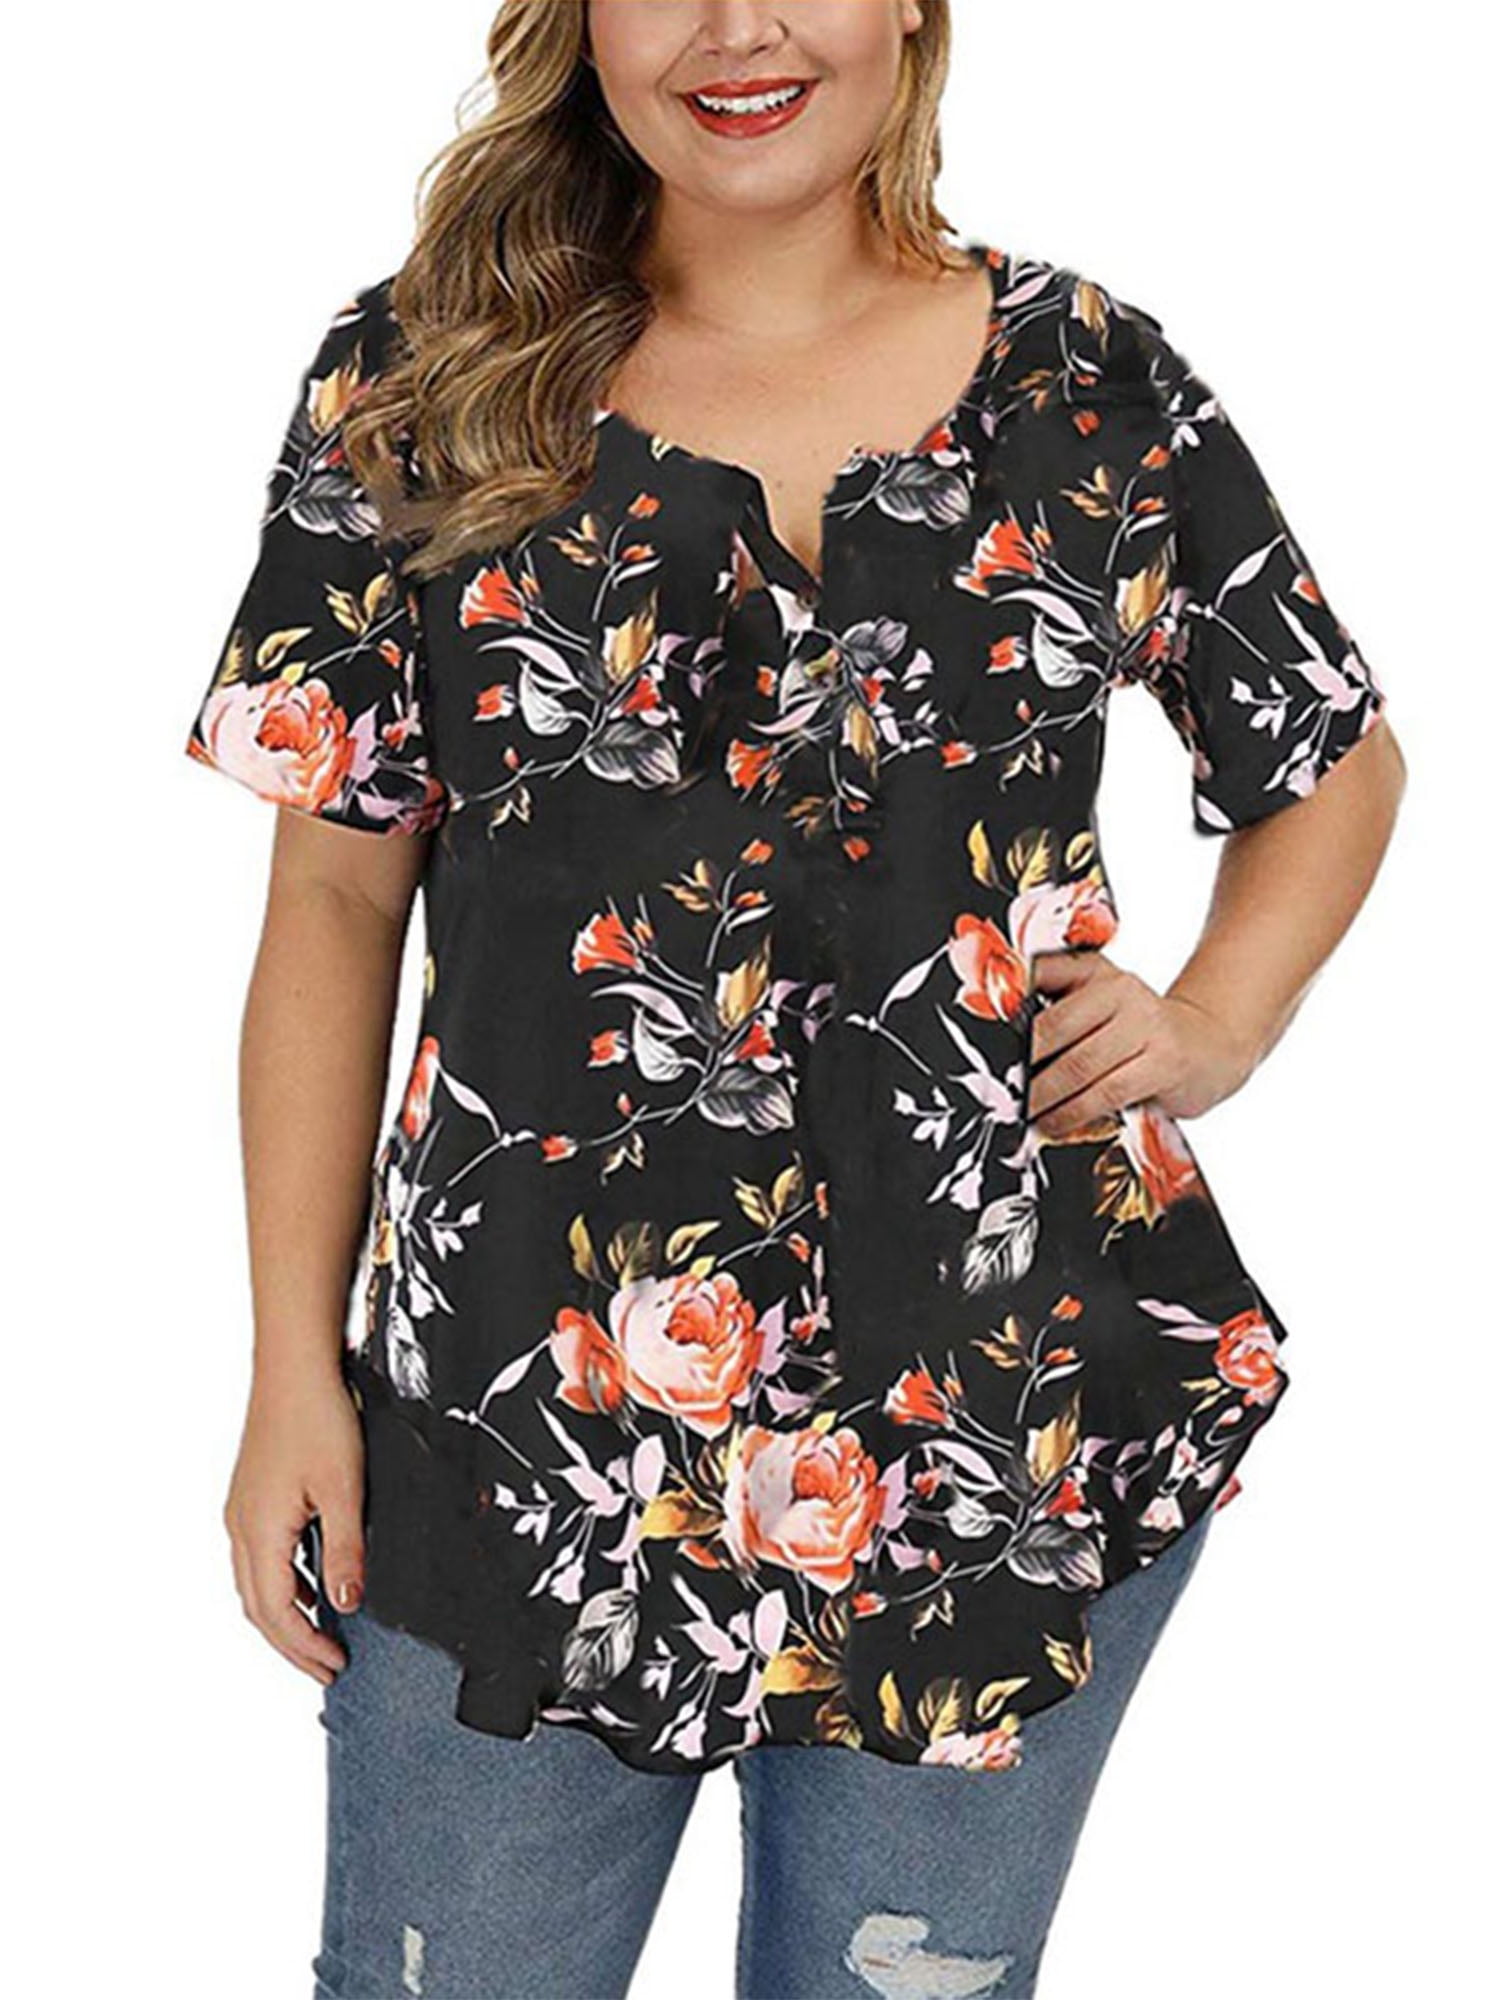 Plus Size Tops for Women Tunic Floral Casual Short Sleeves T Shirts Flowy Blouses 